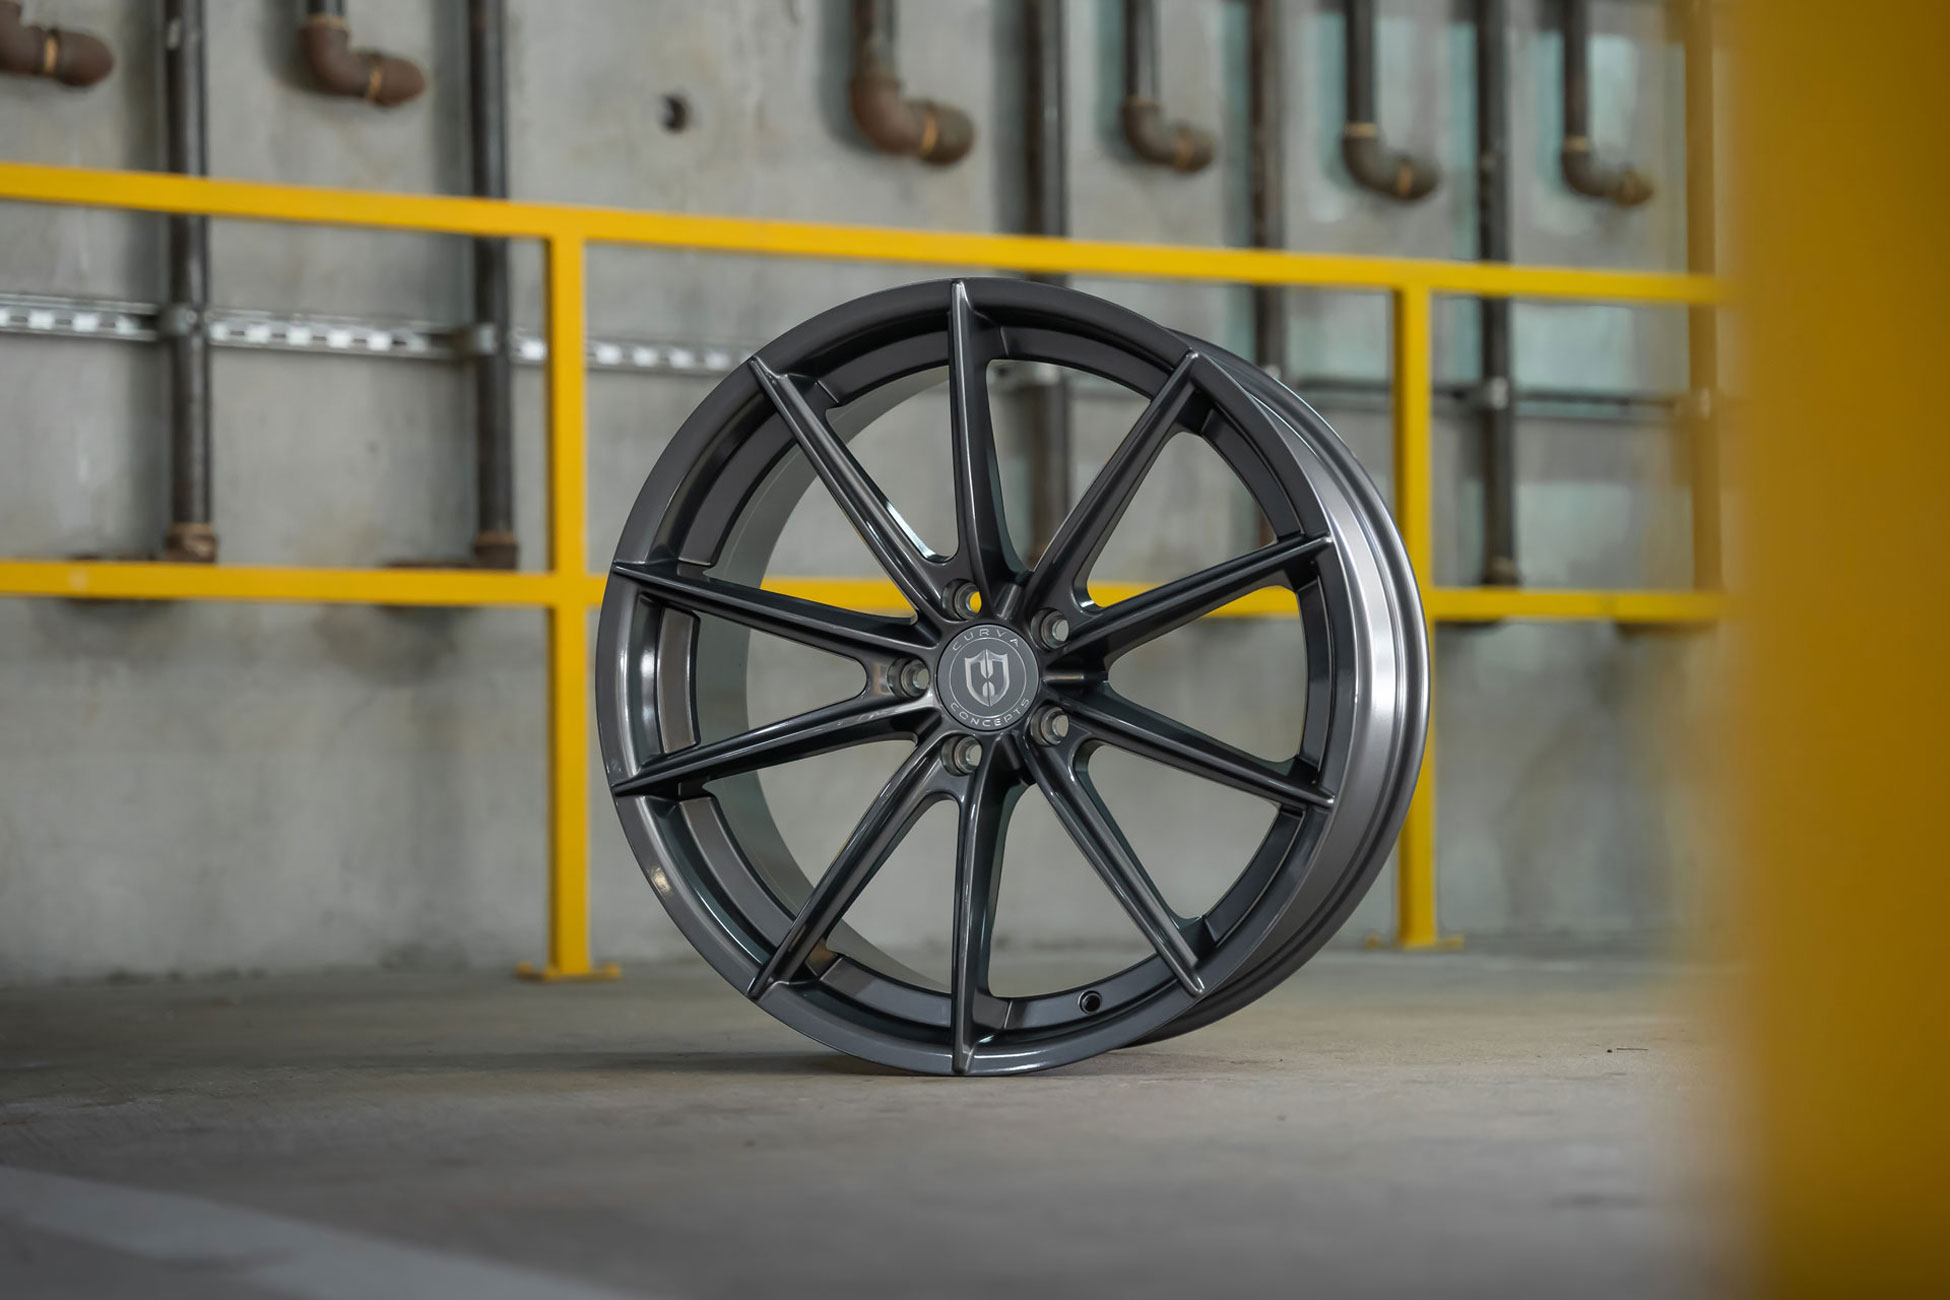 Curva Concepts Flow Forged CFF46